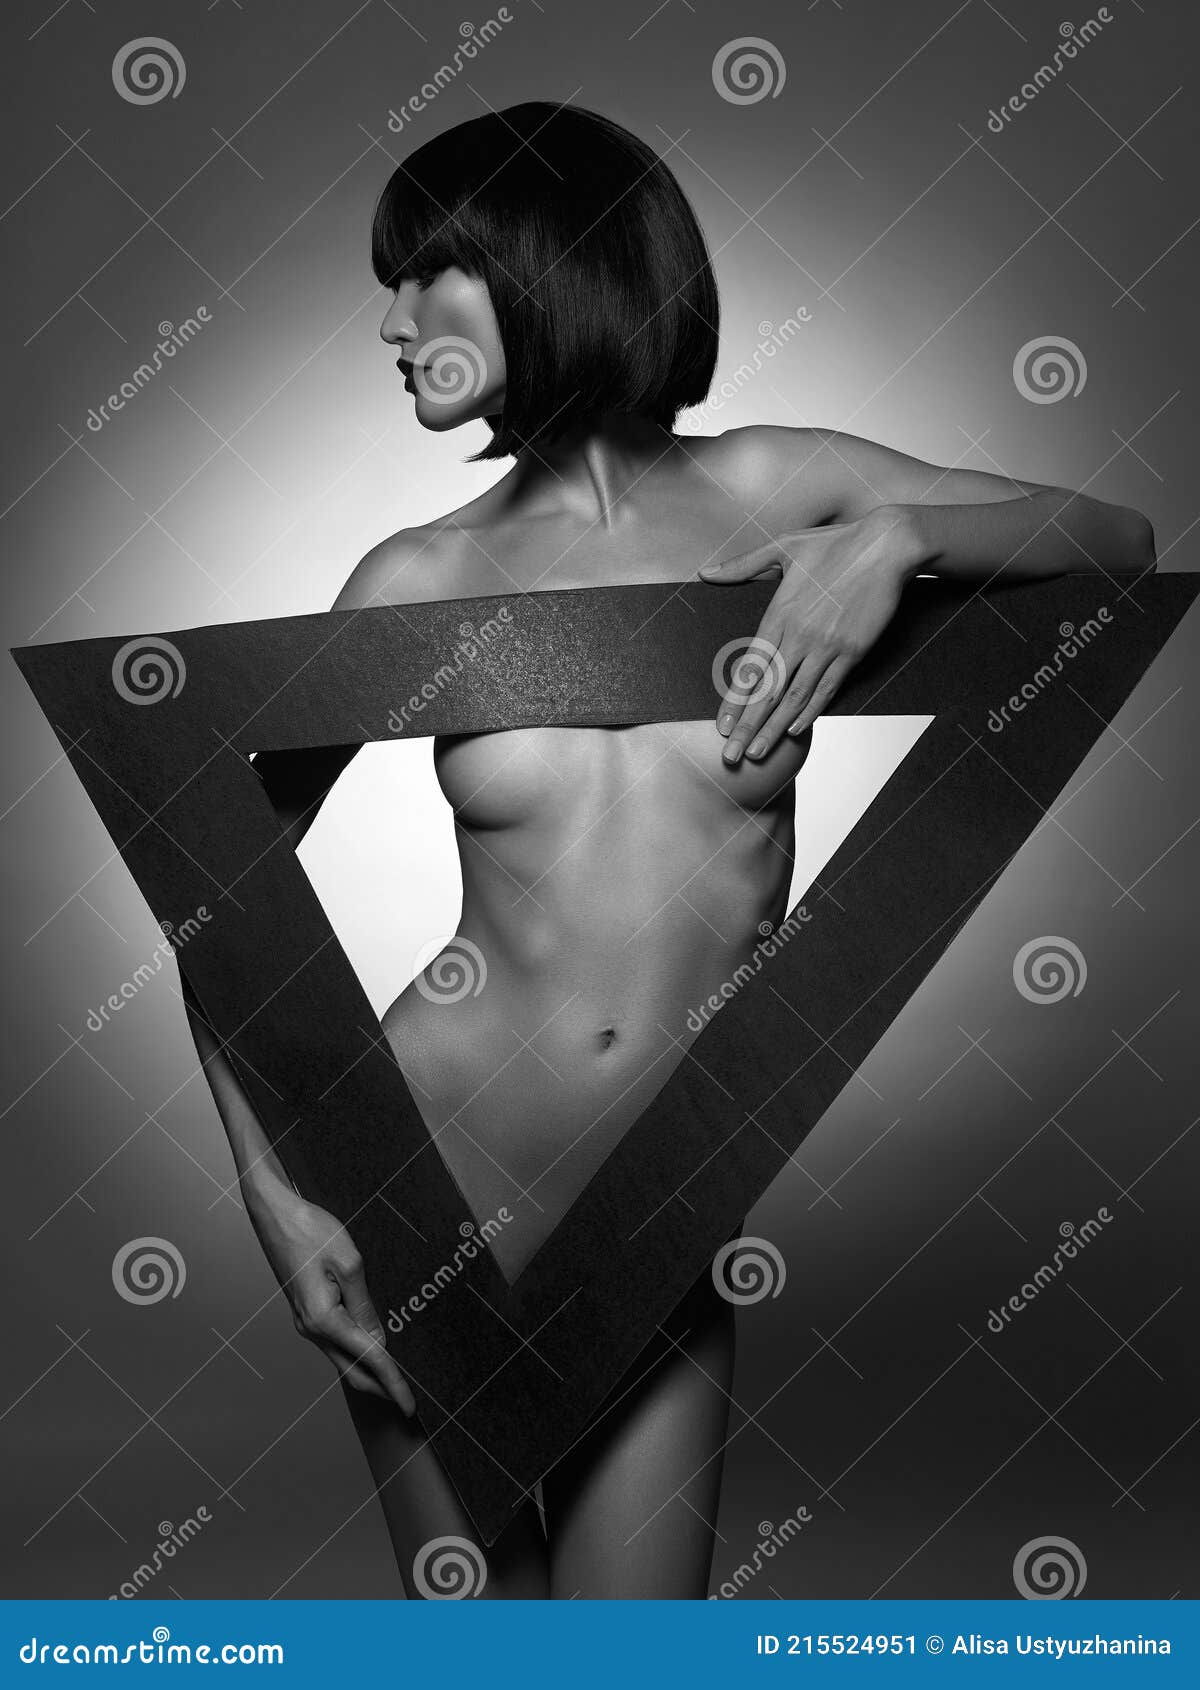 Black On White Nude Girls - Black and White Art Portrait of Nude Girl with Triangle Stock Image - Image  of pose, concept: 215524951